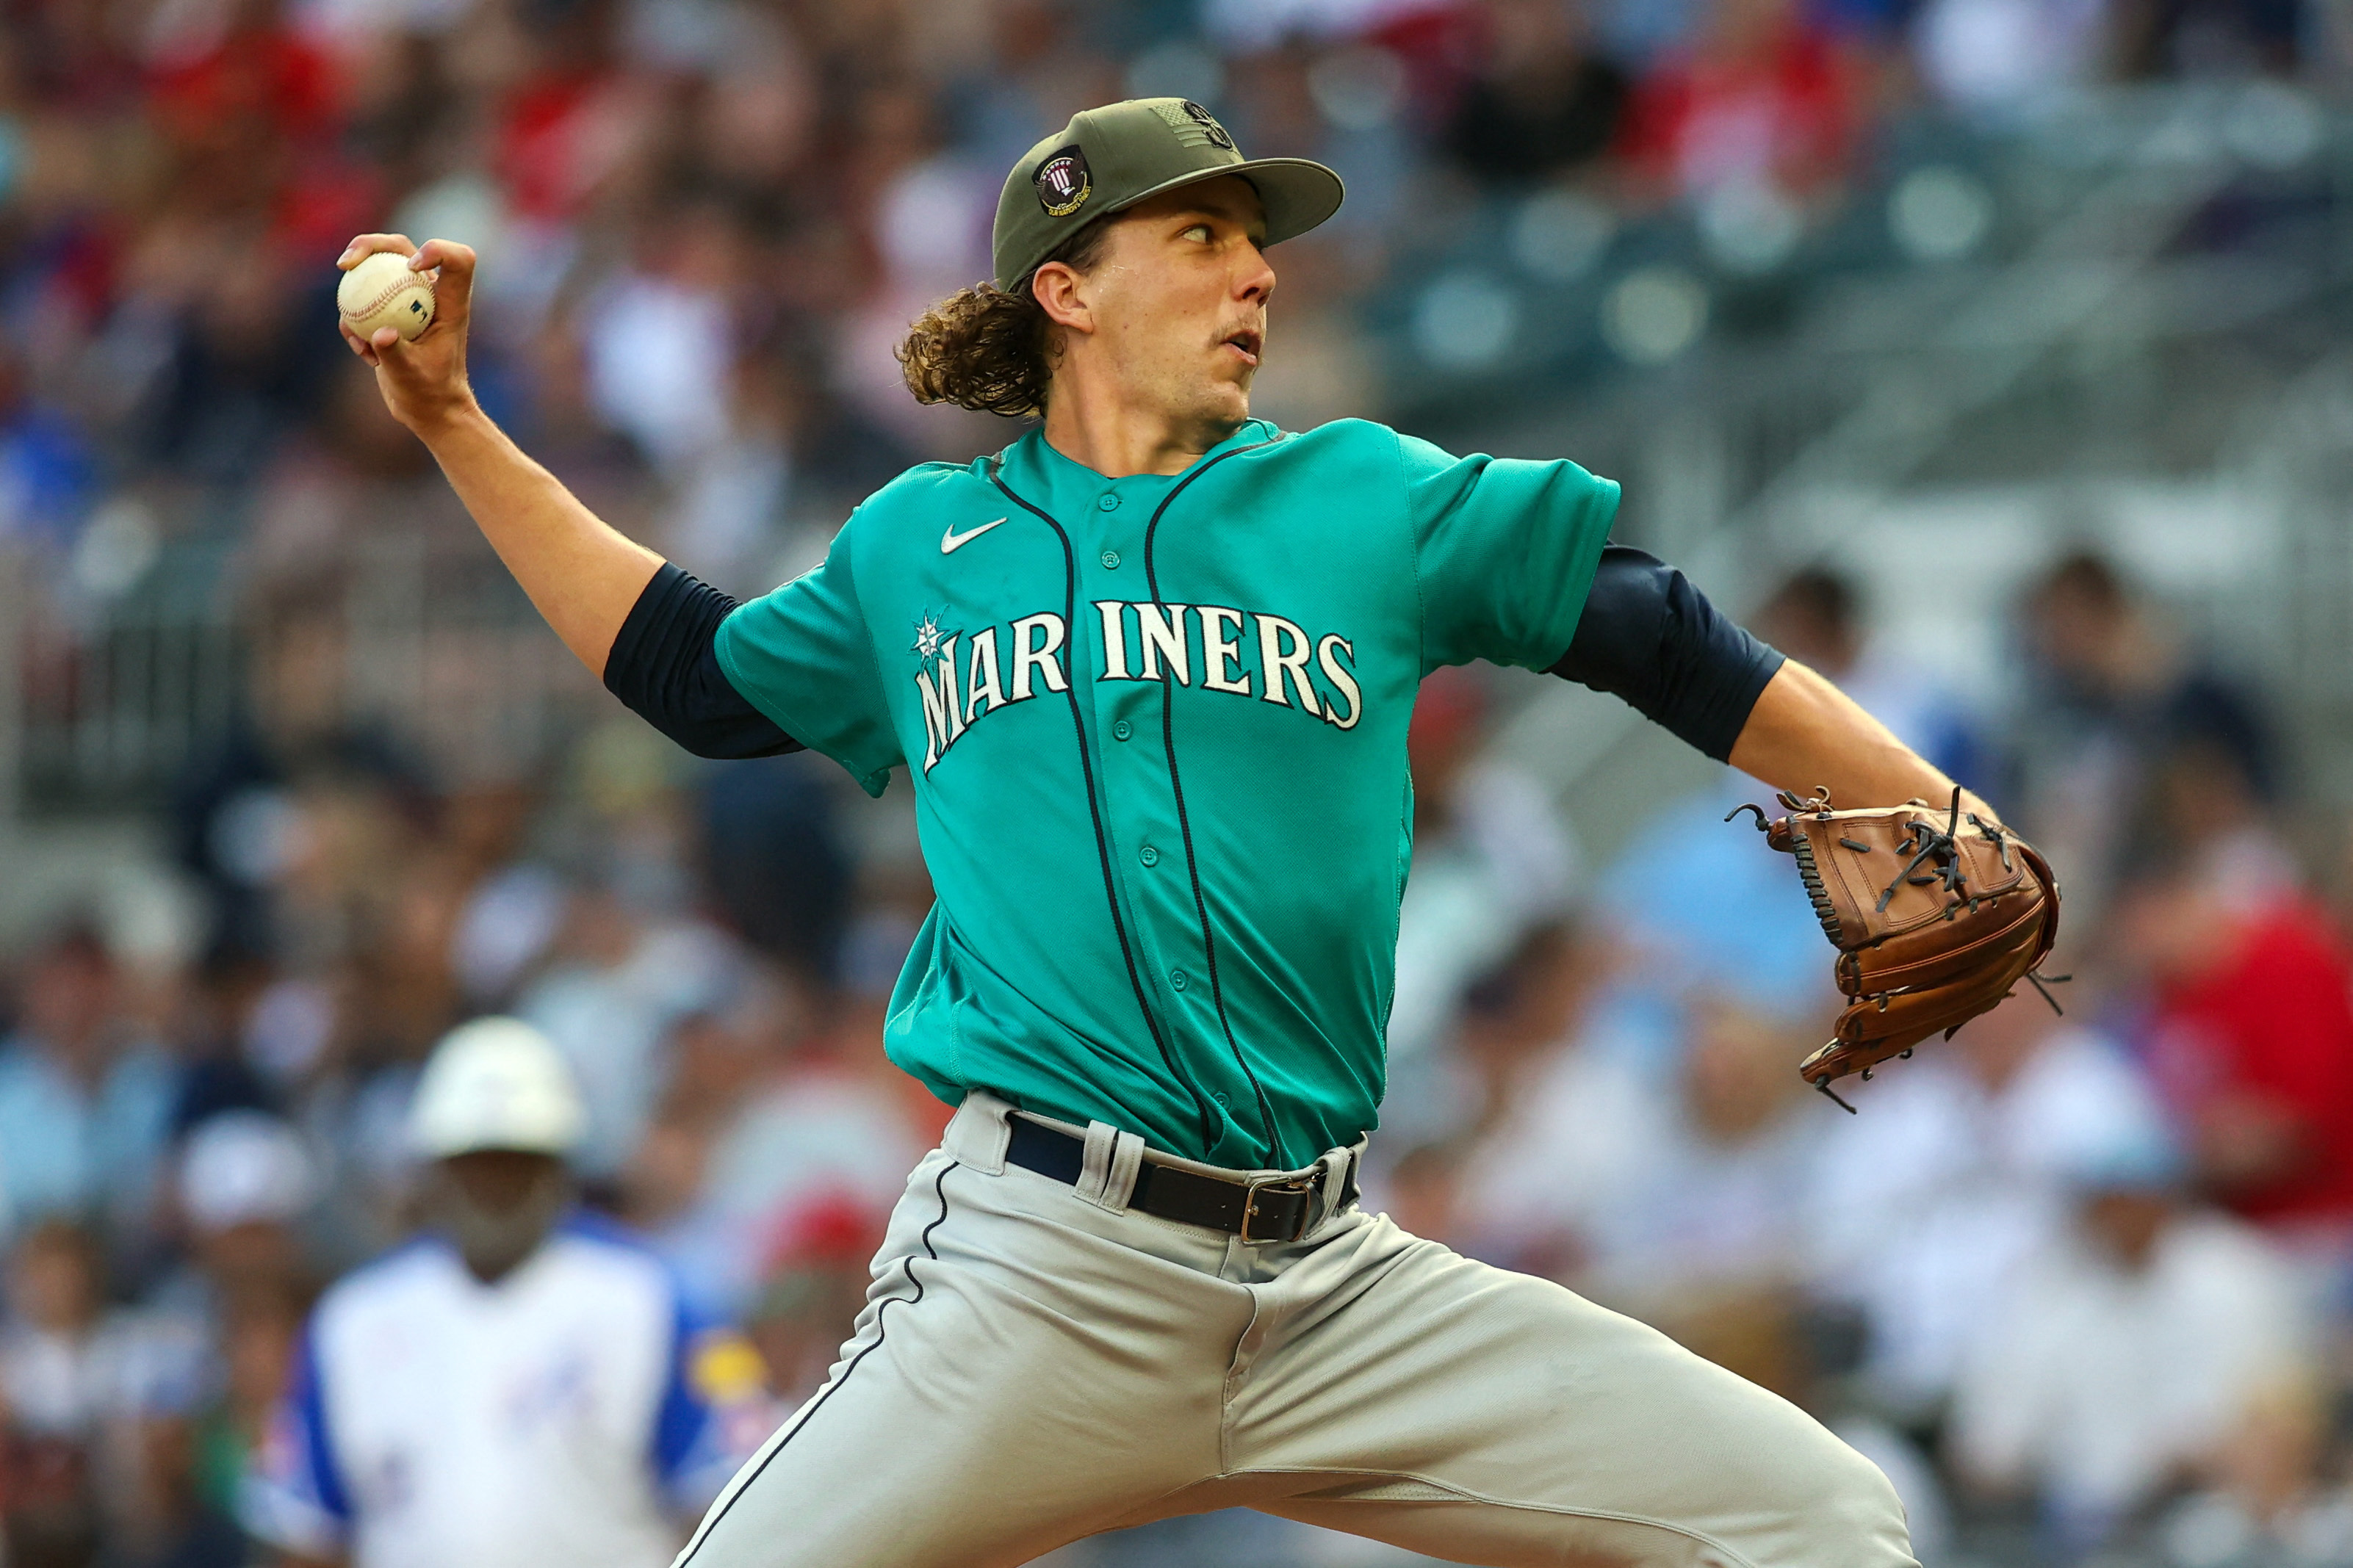 Mariners snap skid with 7-3 win over Braves